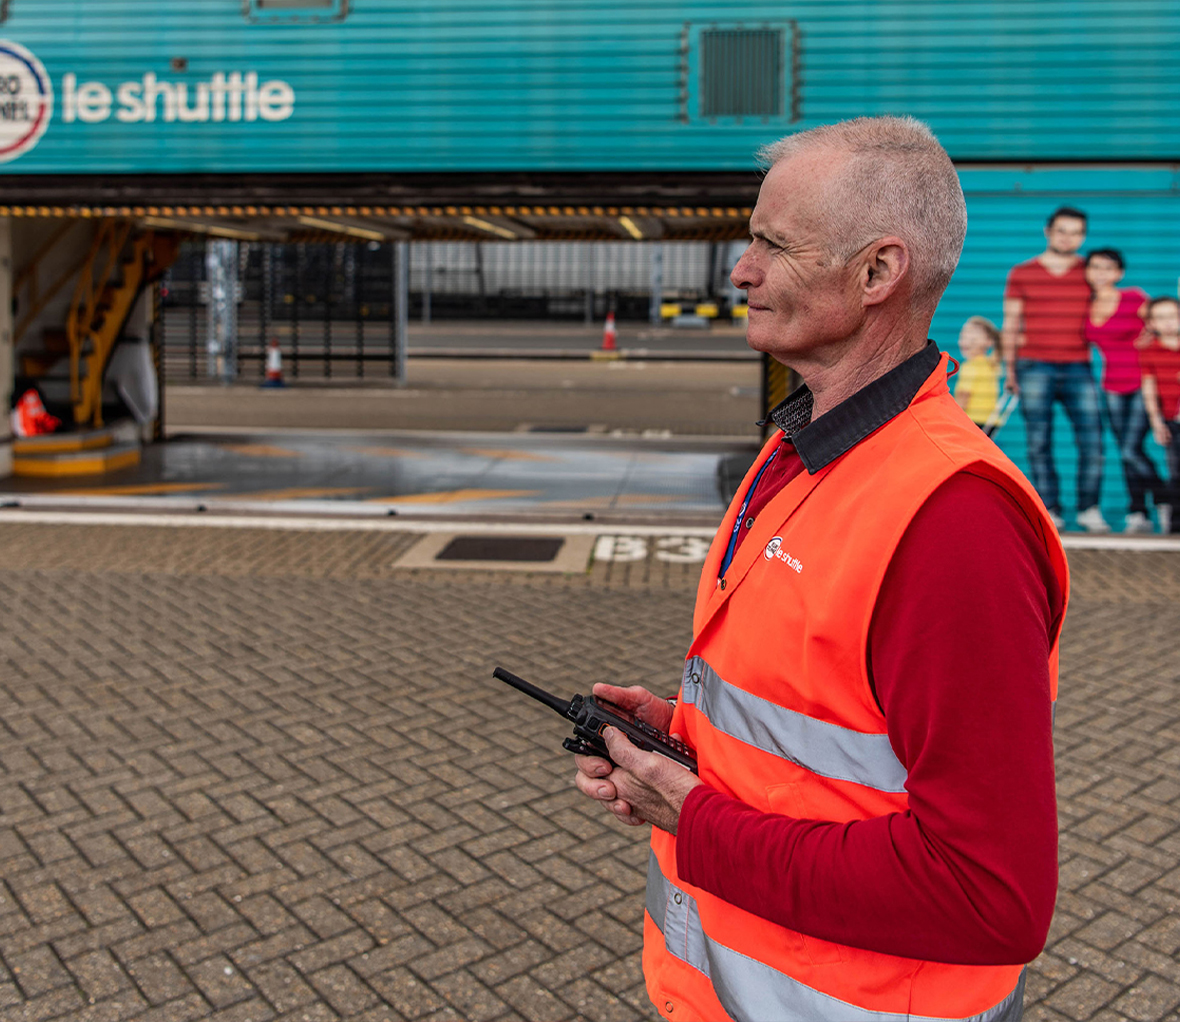 Grey haired man holding a walkie talkie wearing a red long sleeve top and bright orange vest standing in front of a blue Eurotunnel shuttle